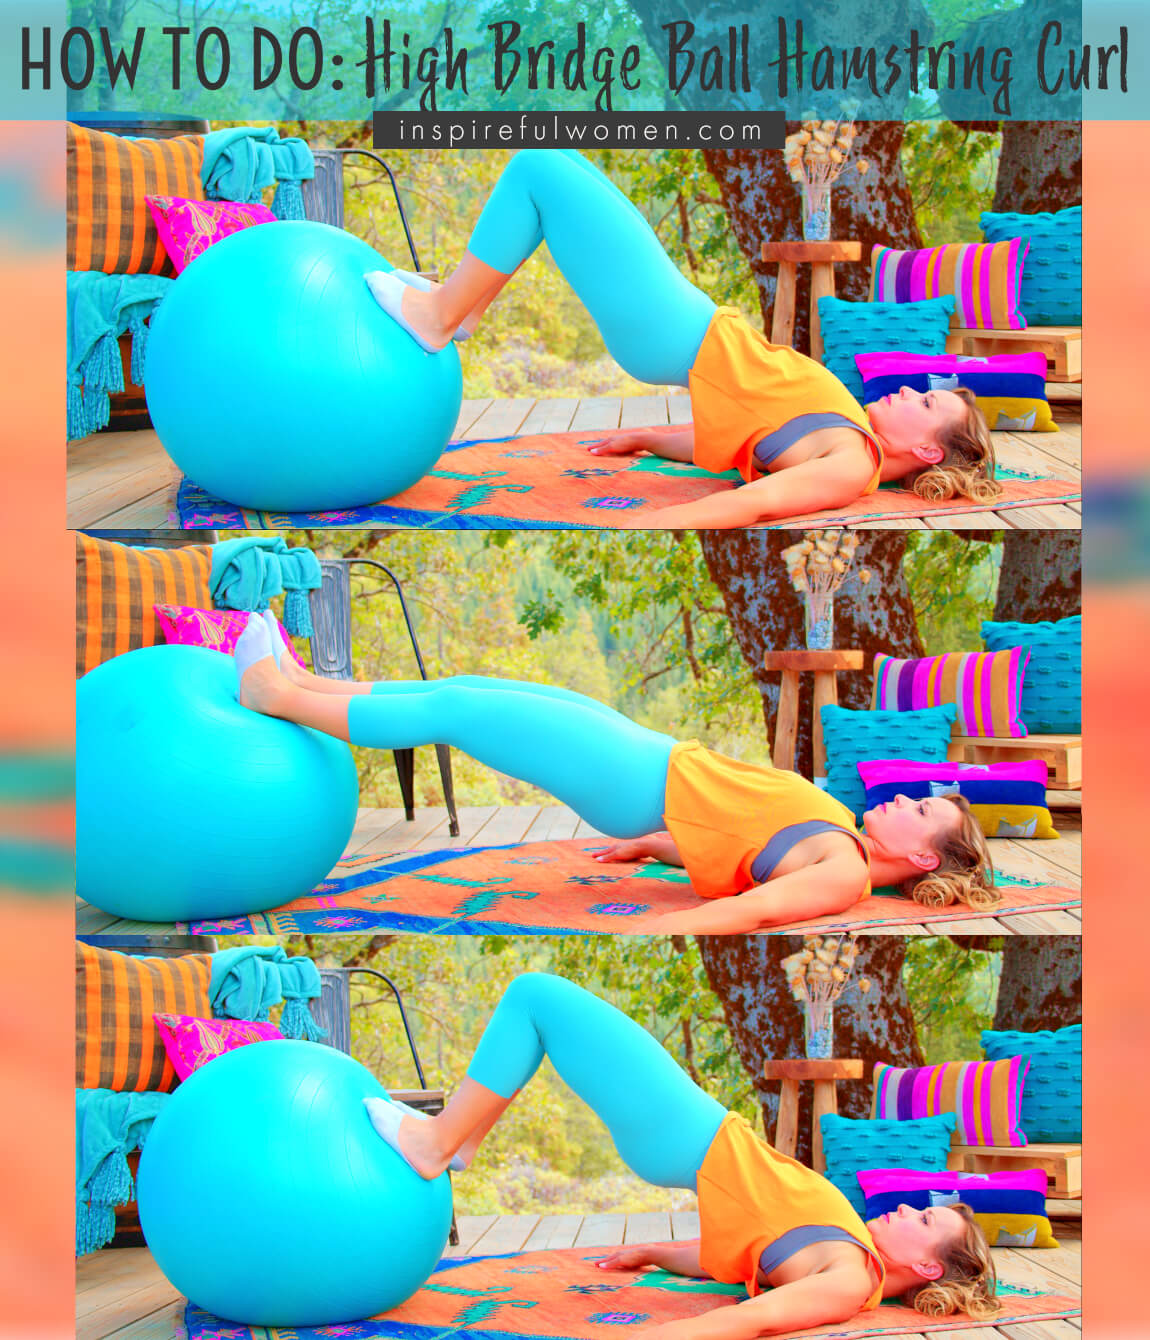 how-to-high-bridge-hamstring-curl-stability-ball-home-hip-extensor-bodyweight-thigh-exercise-proper-form